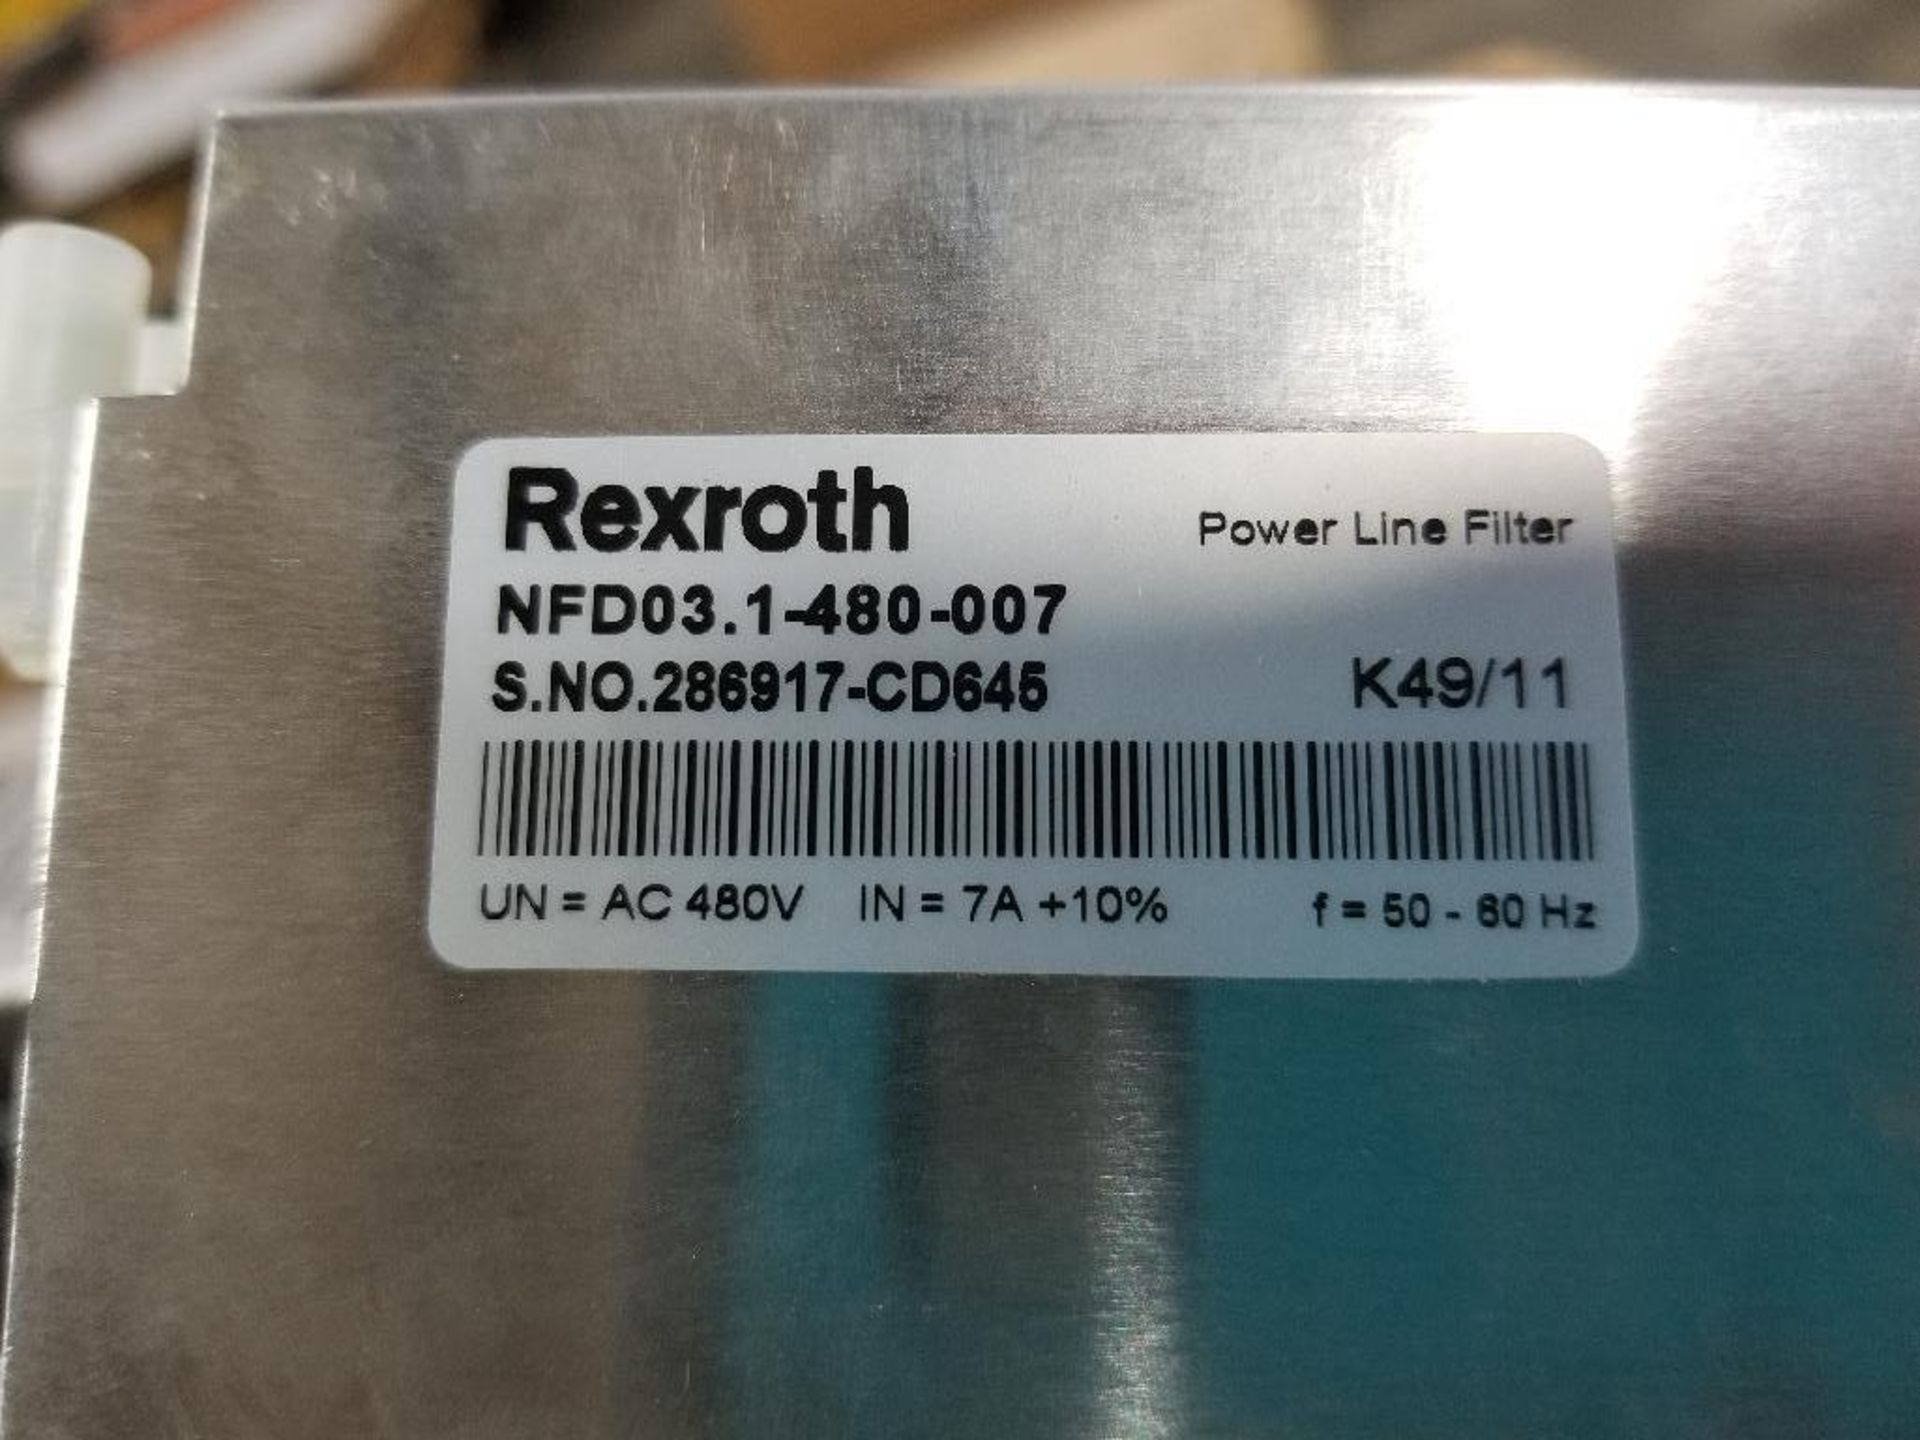 Qty 3 - Rexroth power supply. Model NFD03.1-480-007. - Image 4 of 4